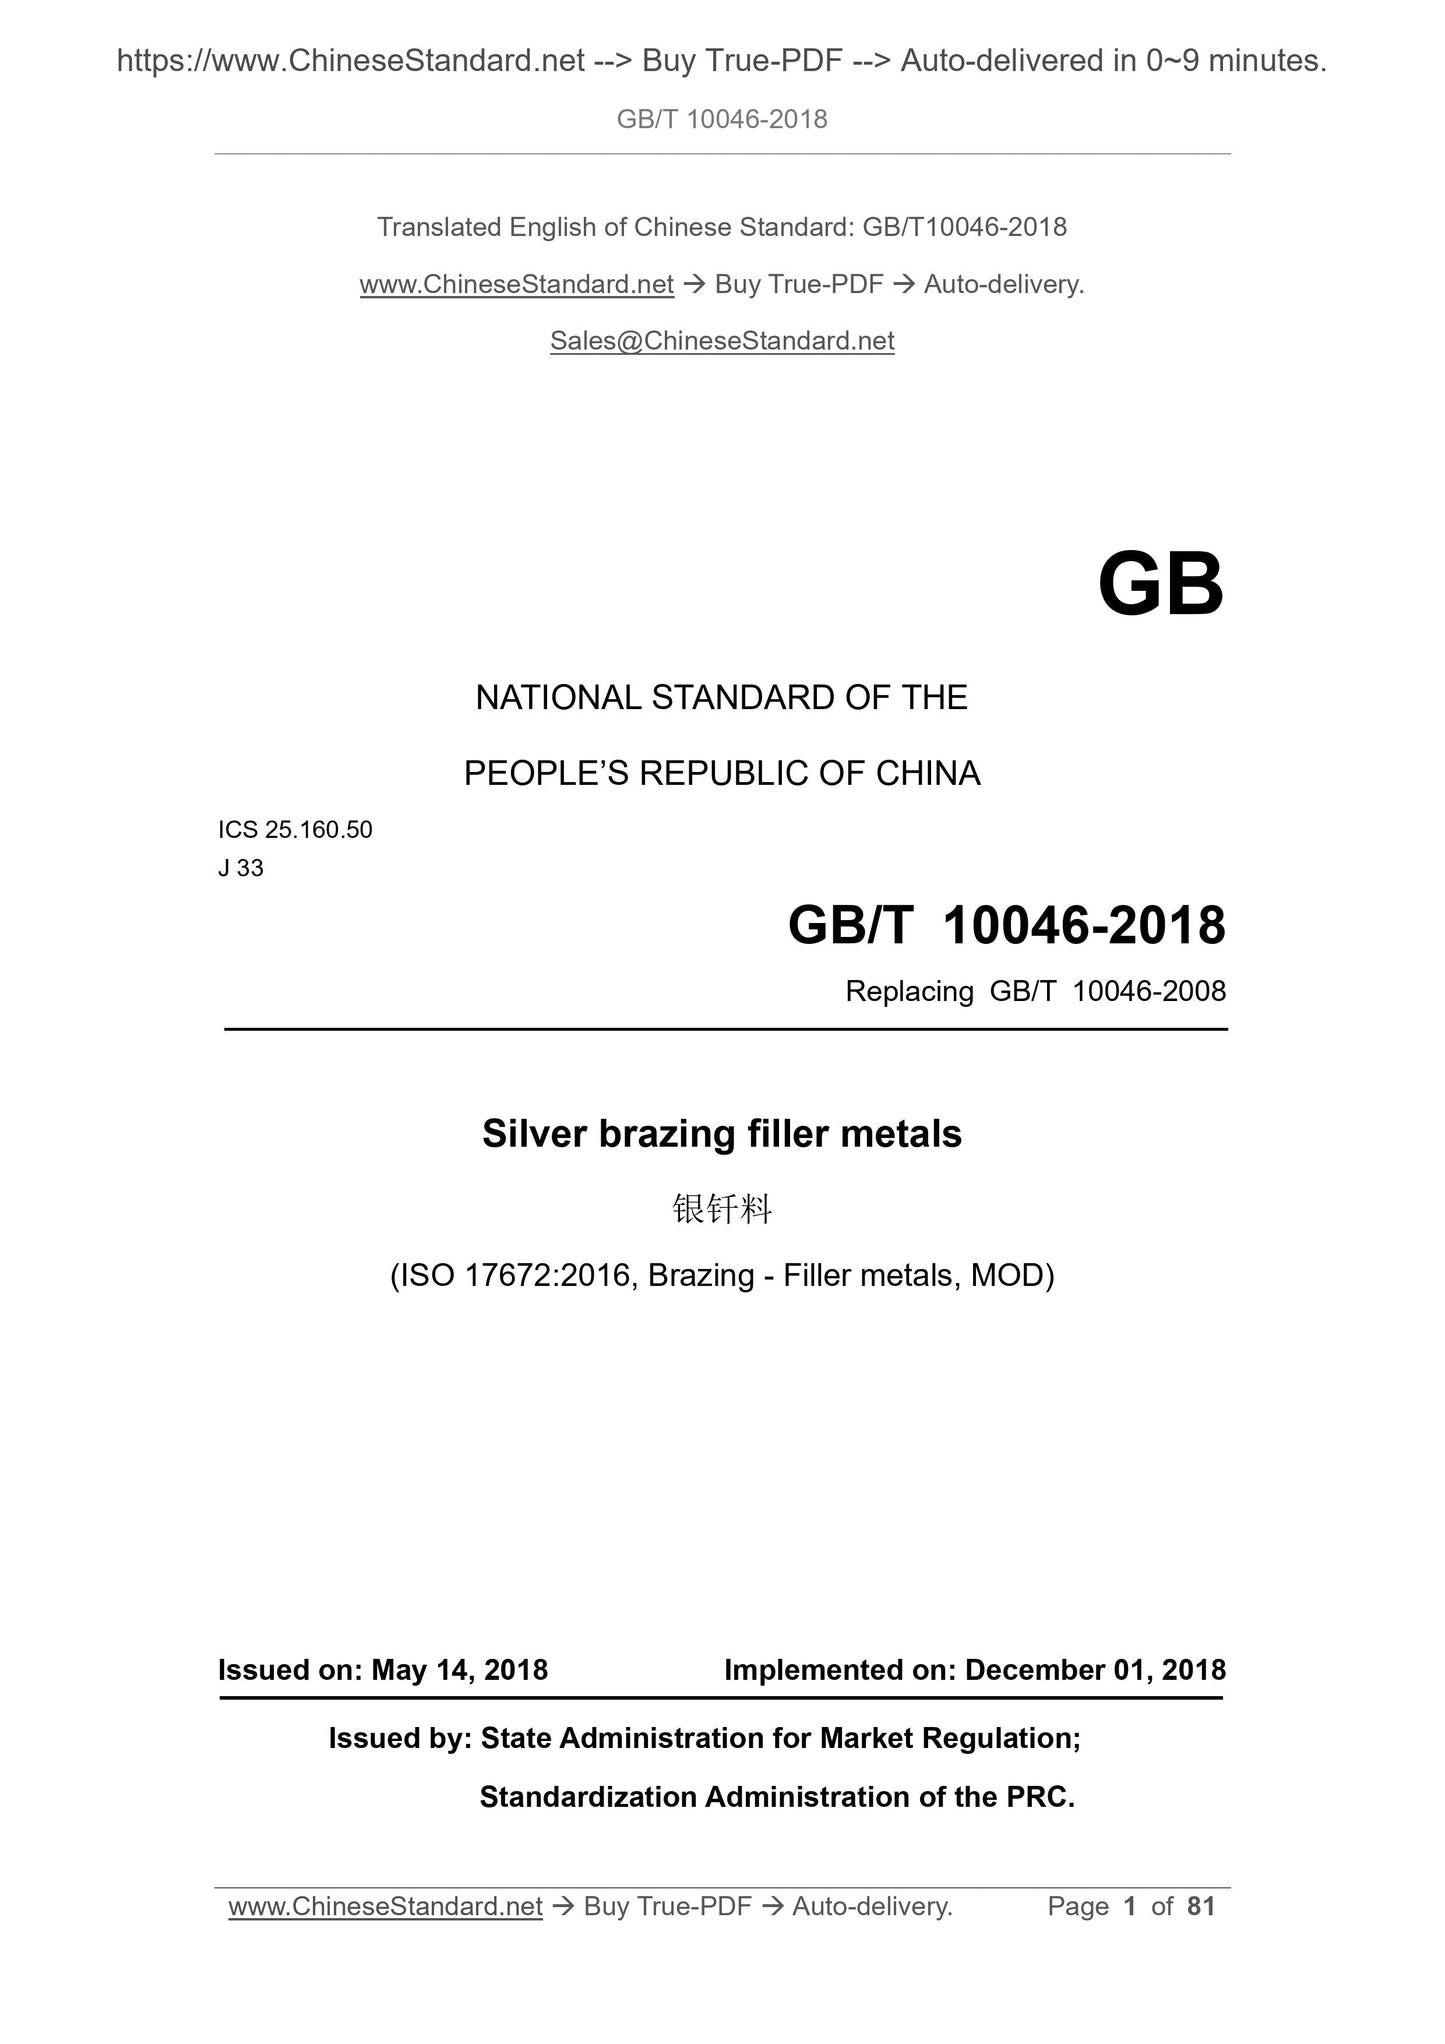 GB/T 10046-2018 Page 1